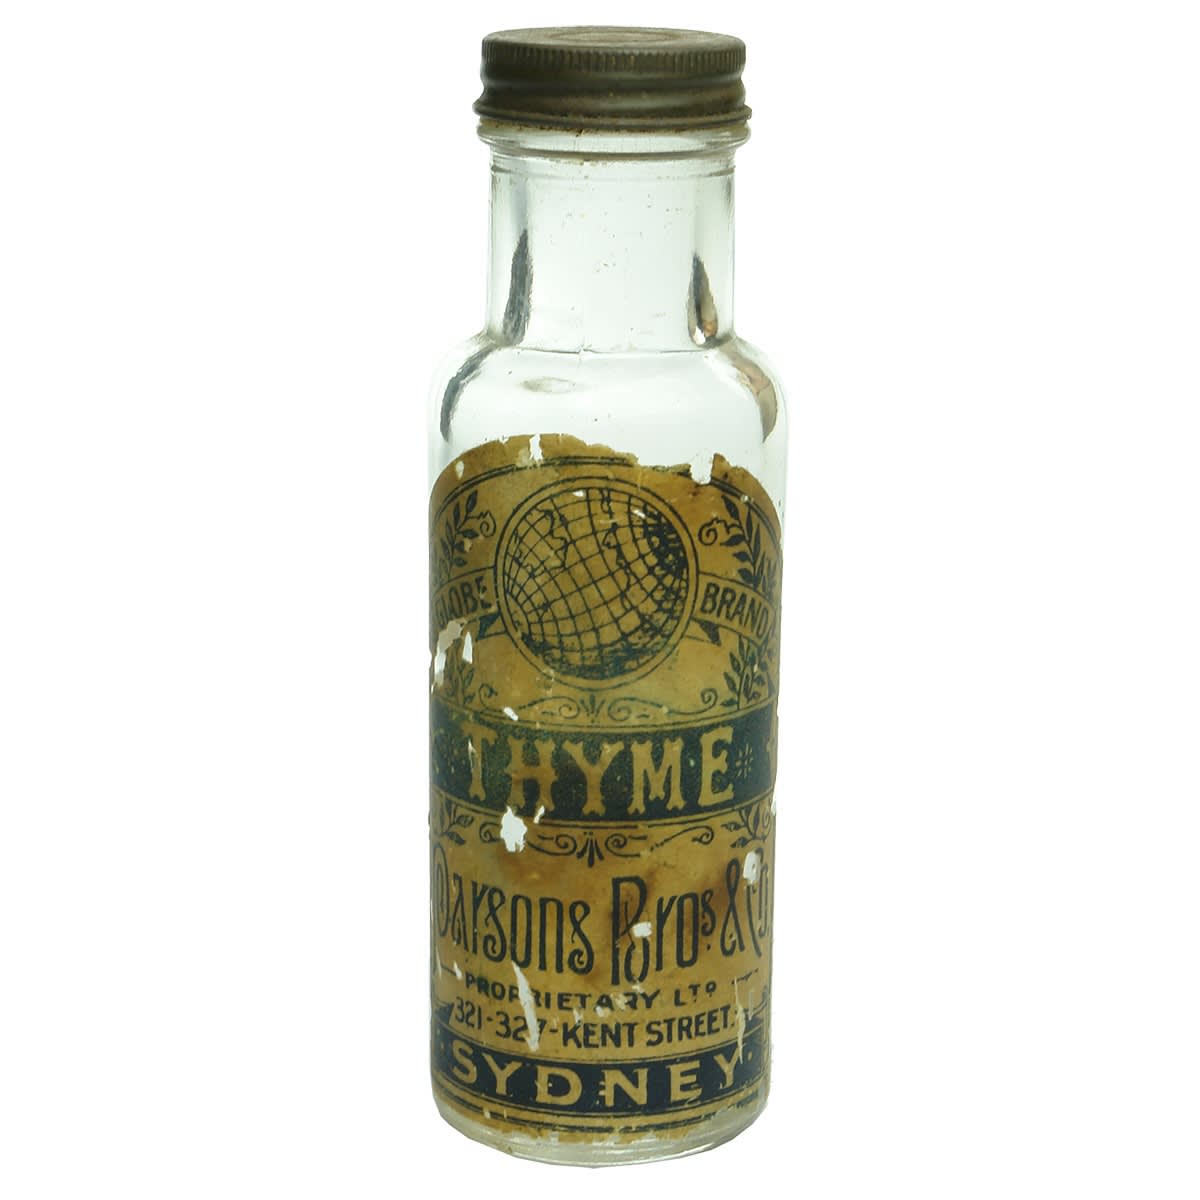 Herbs Jar. Plain jar with paper label for Parsons Bros & Co., Sydney. Thyme. (New South Wales)